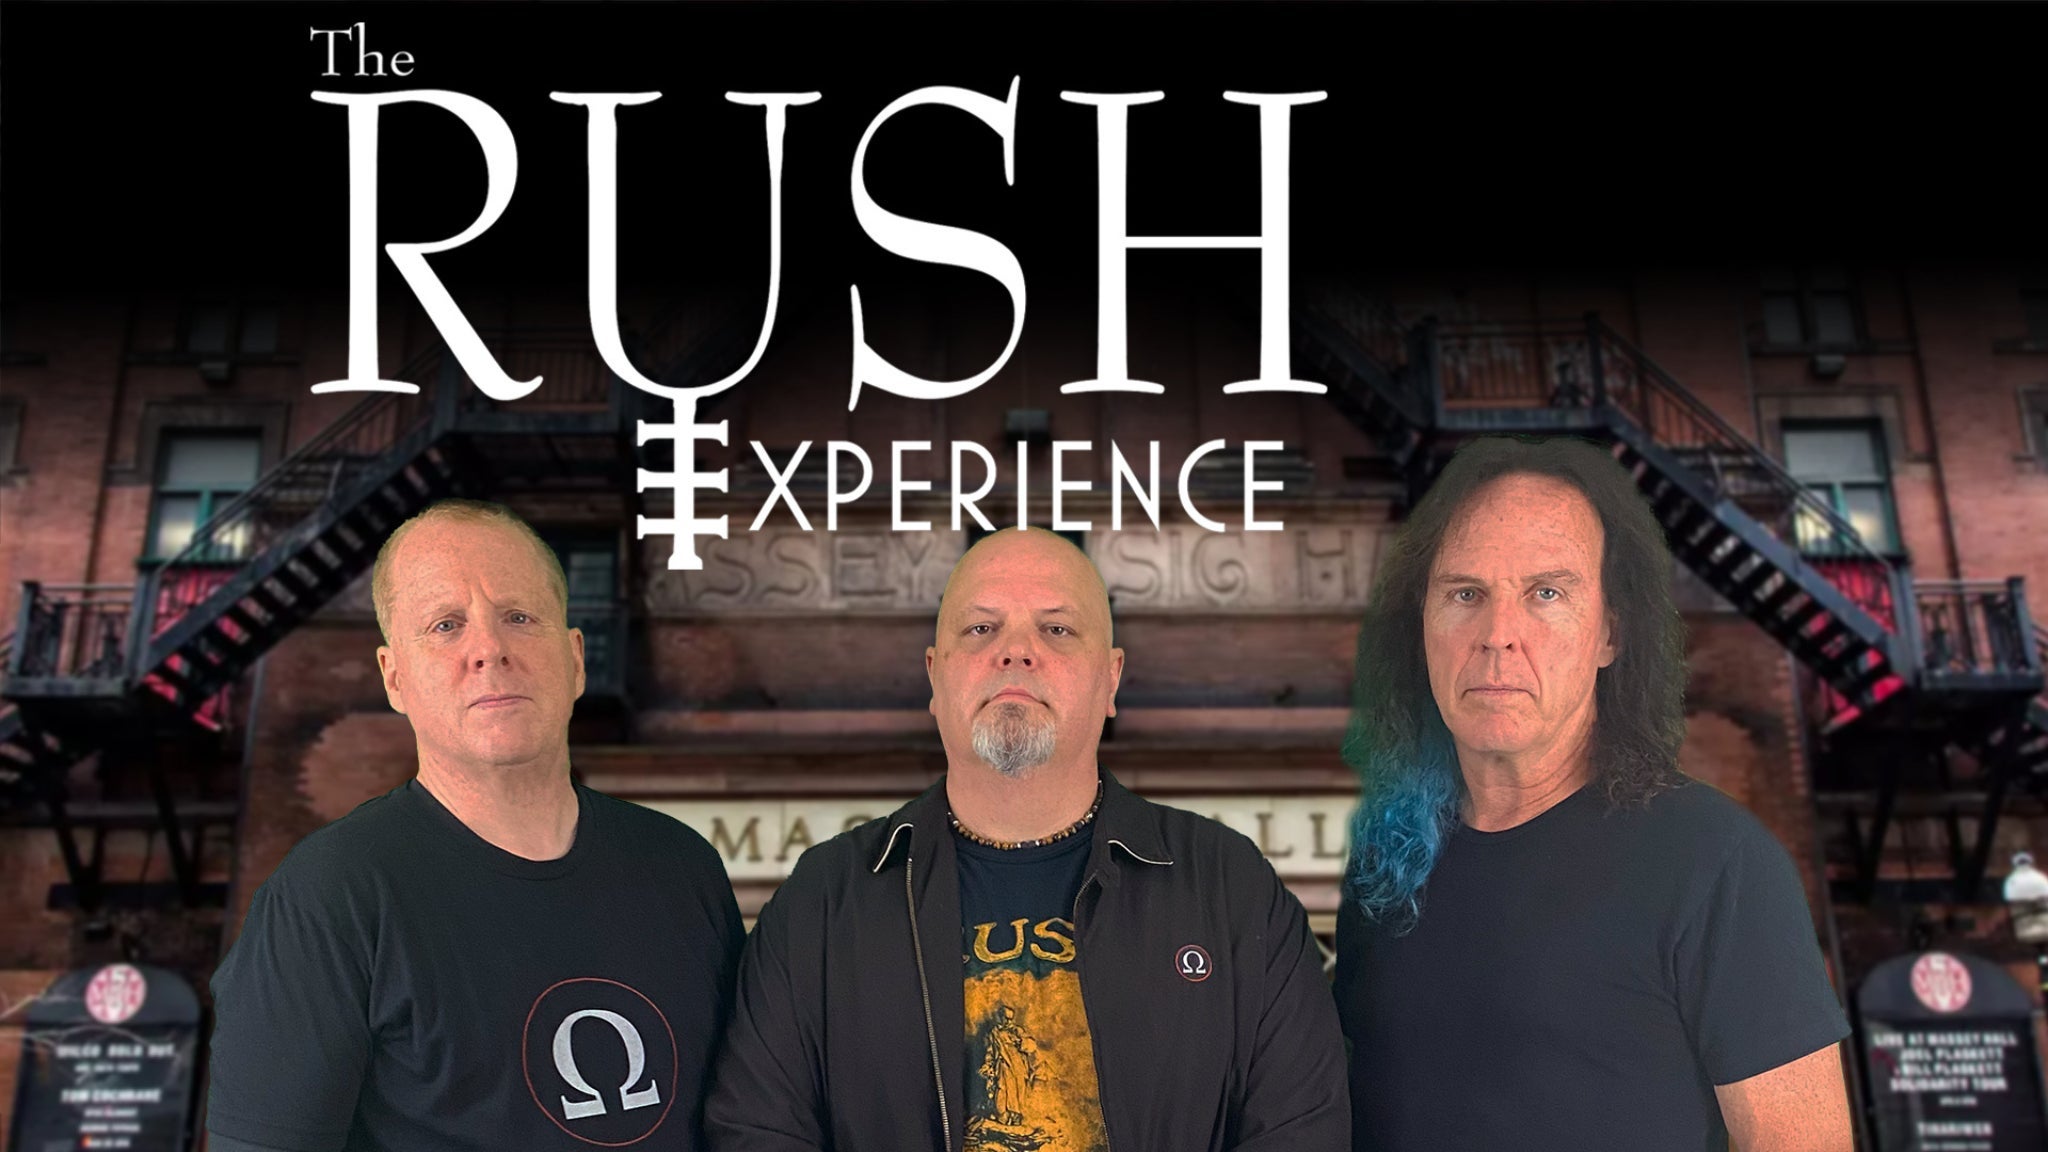 An Evening With The Rush Experience